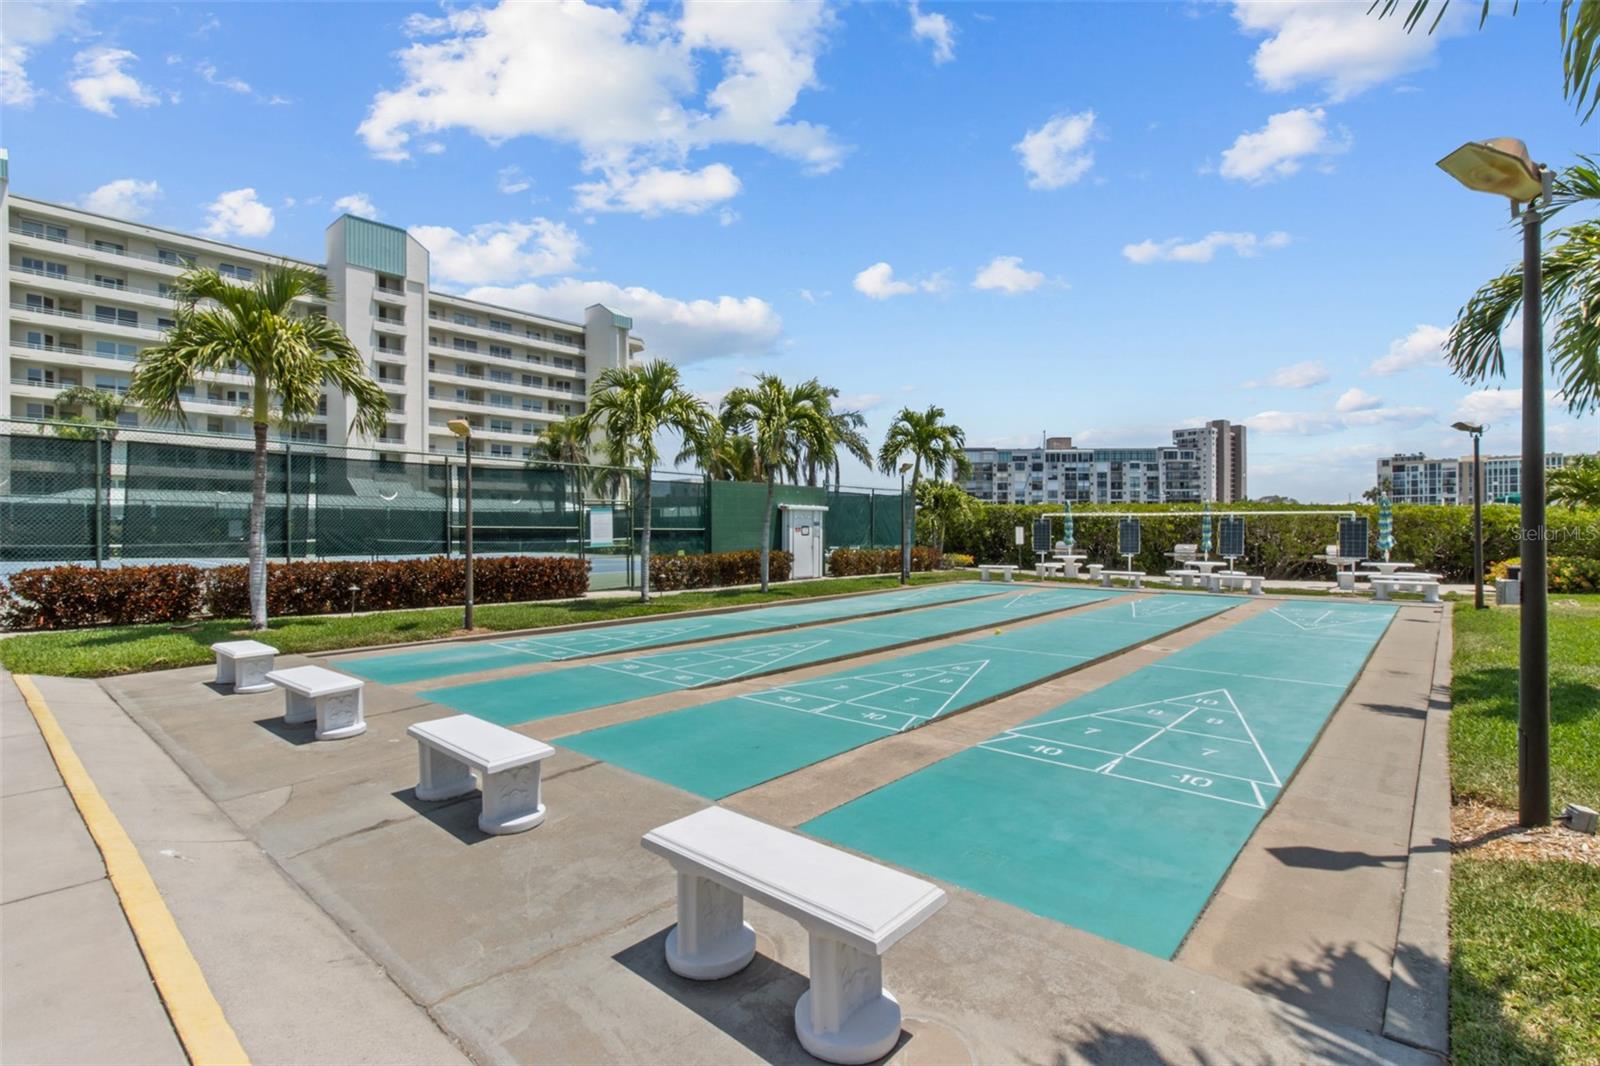 Enjoy a game or two of shuffle board.  You will never get bored with all the amenities that this community offers.